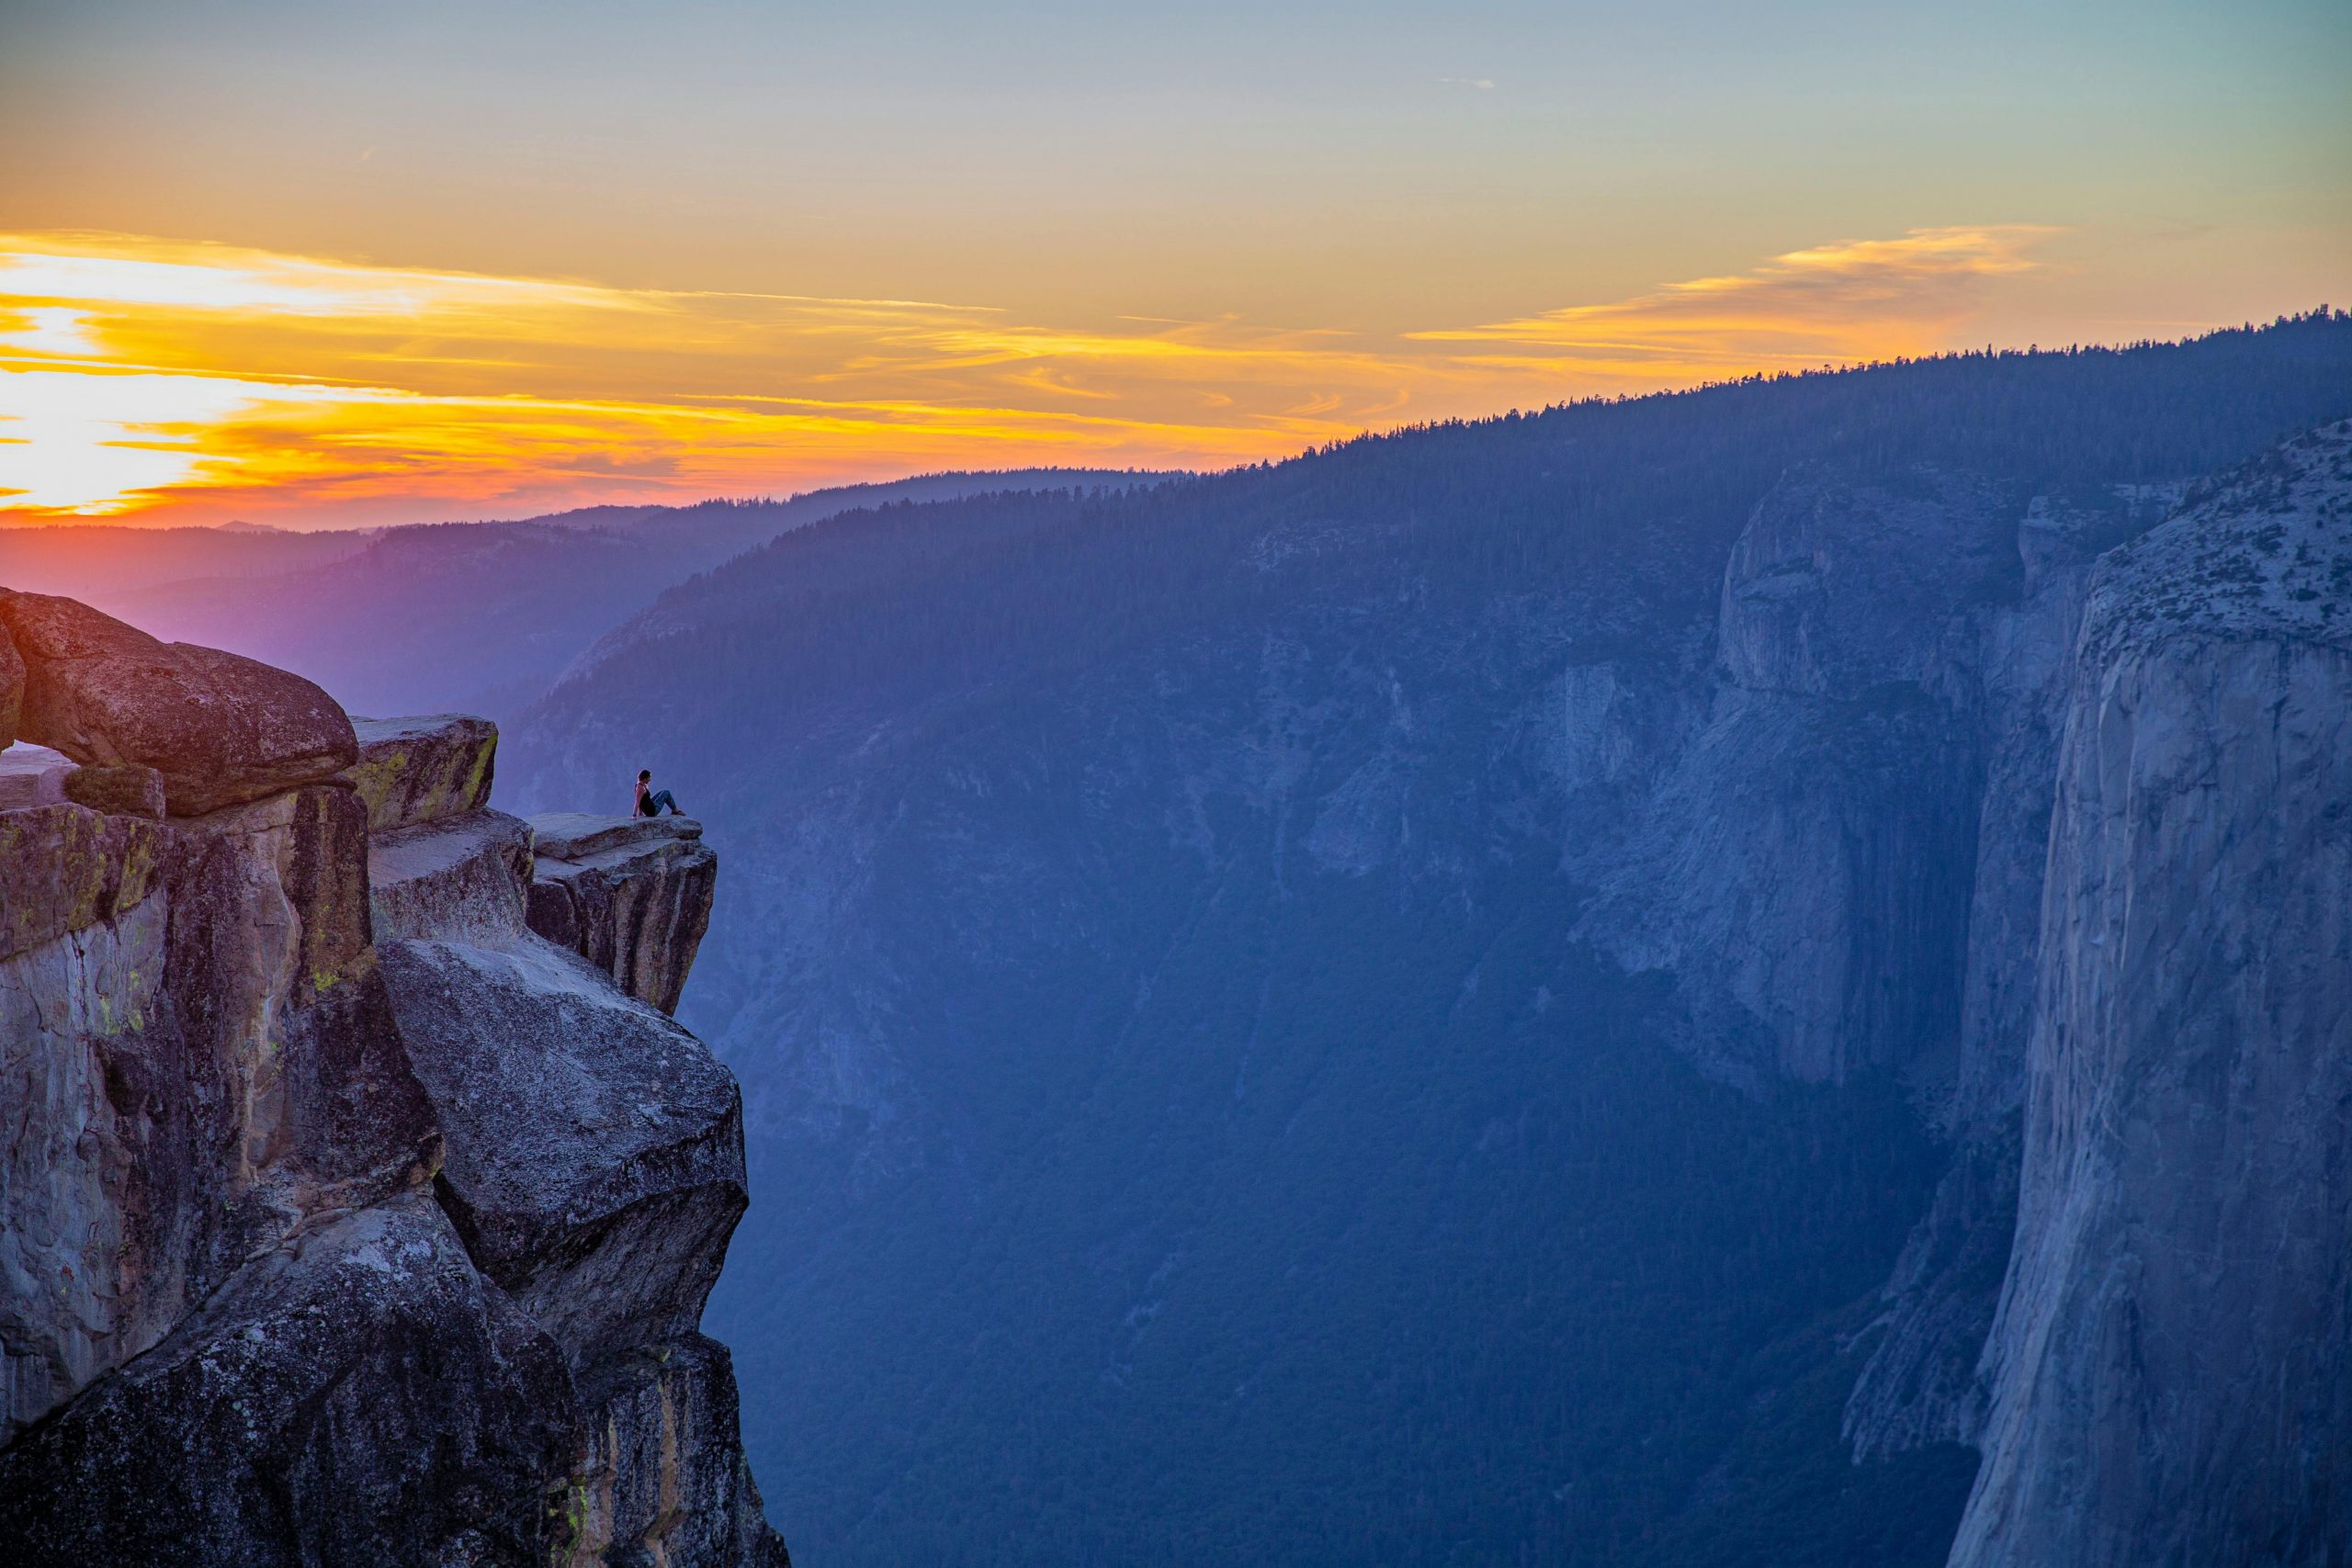 Sunrise at Yosemite overlooking a clif